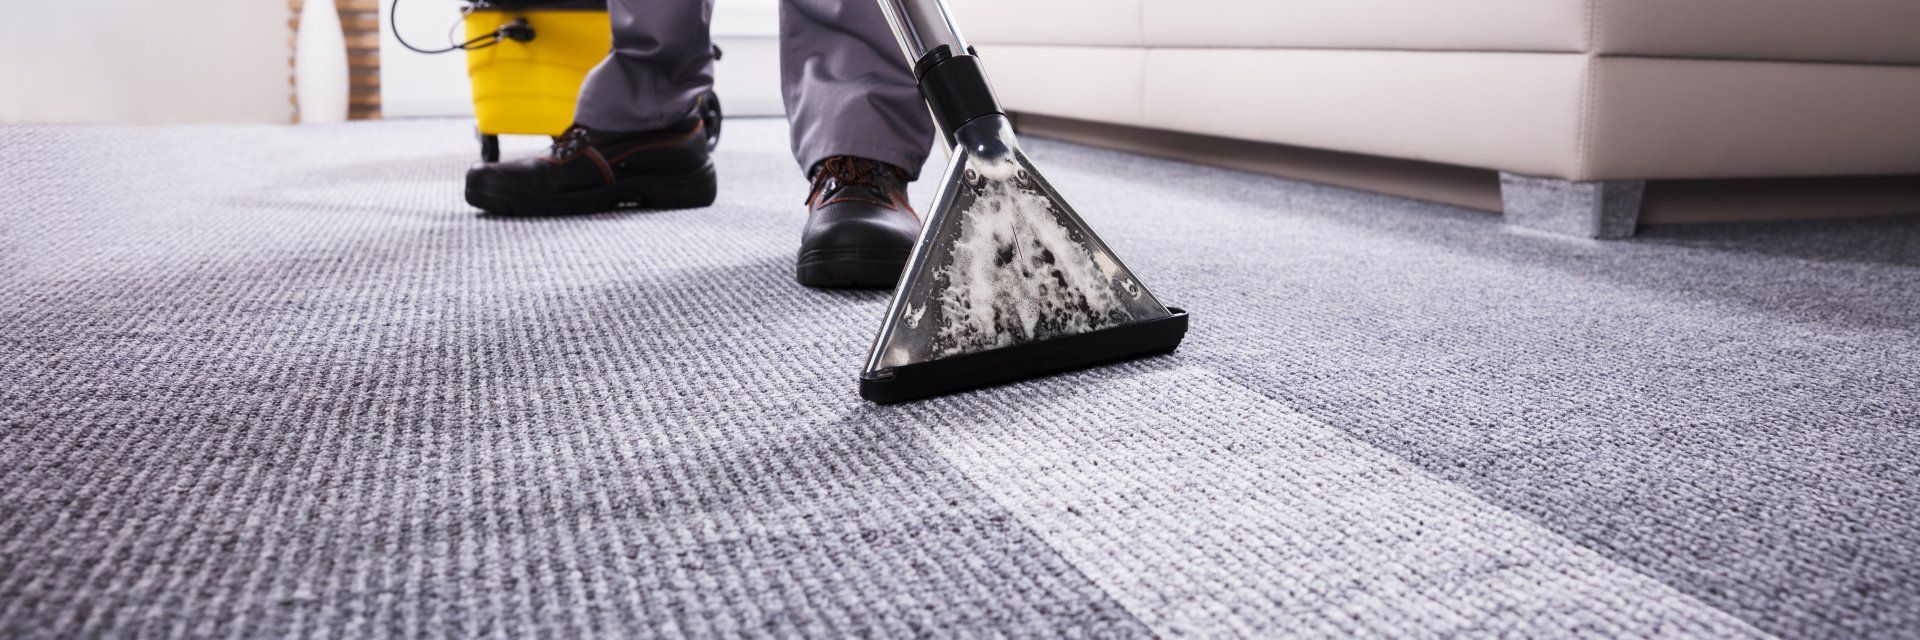 Janitor Cleaning Carpet With Vacuum Cleaning